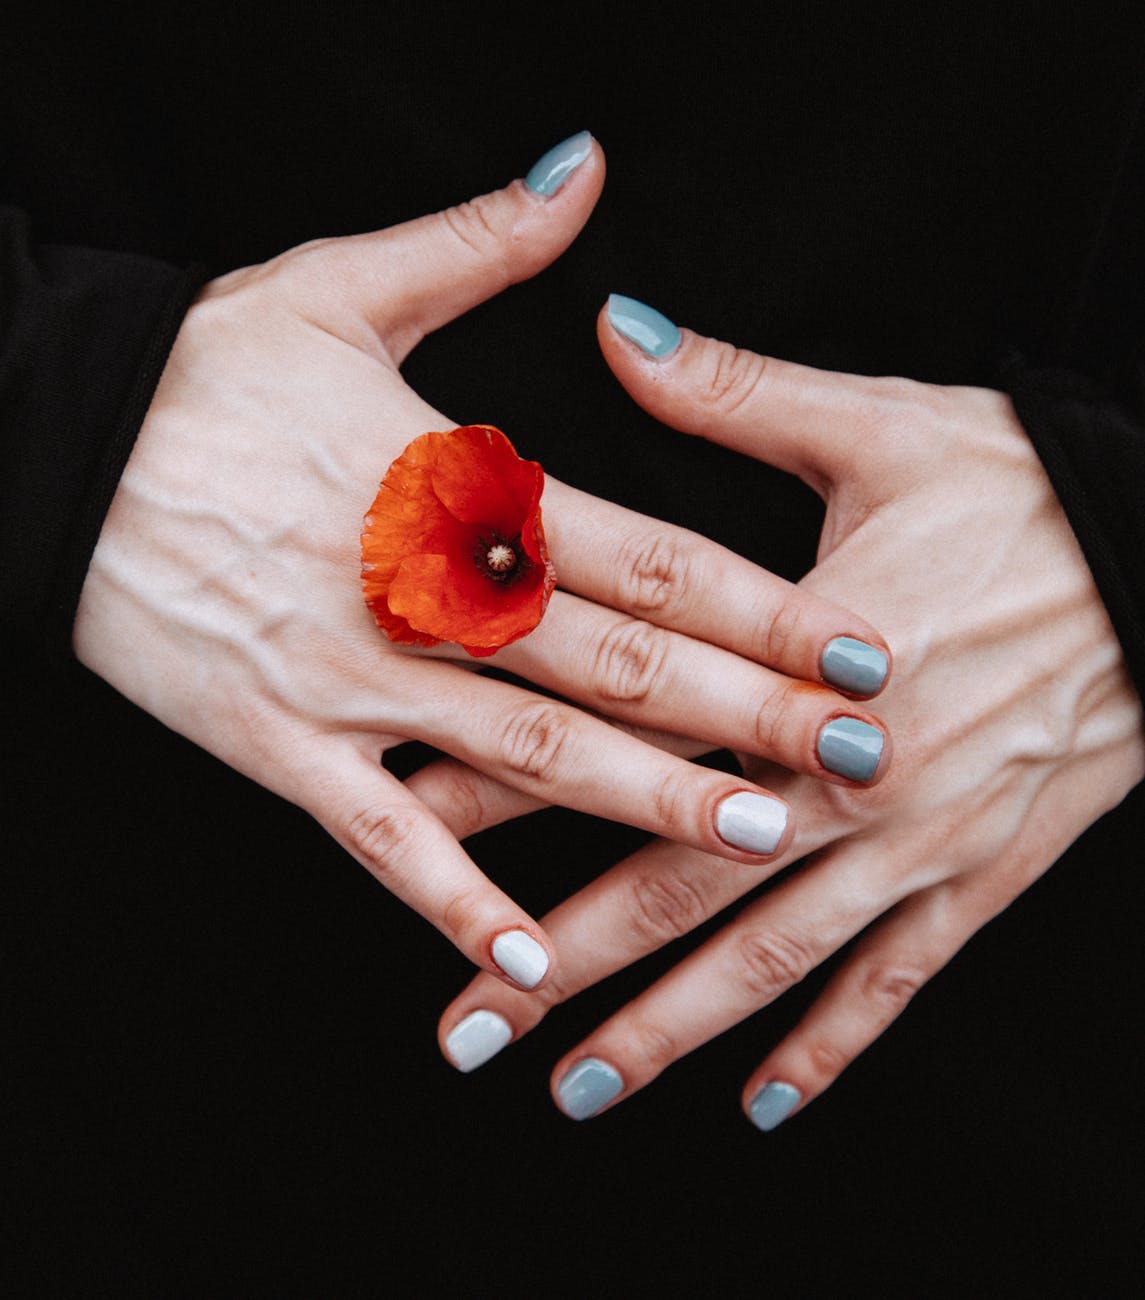 person holding red petaled flower between his finger